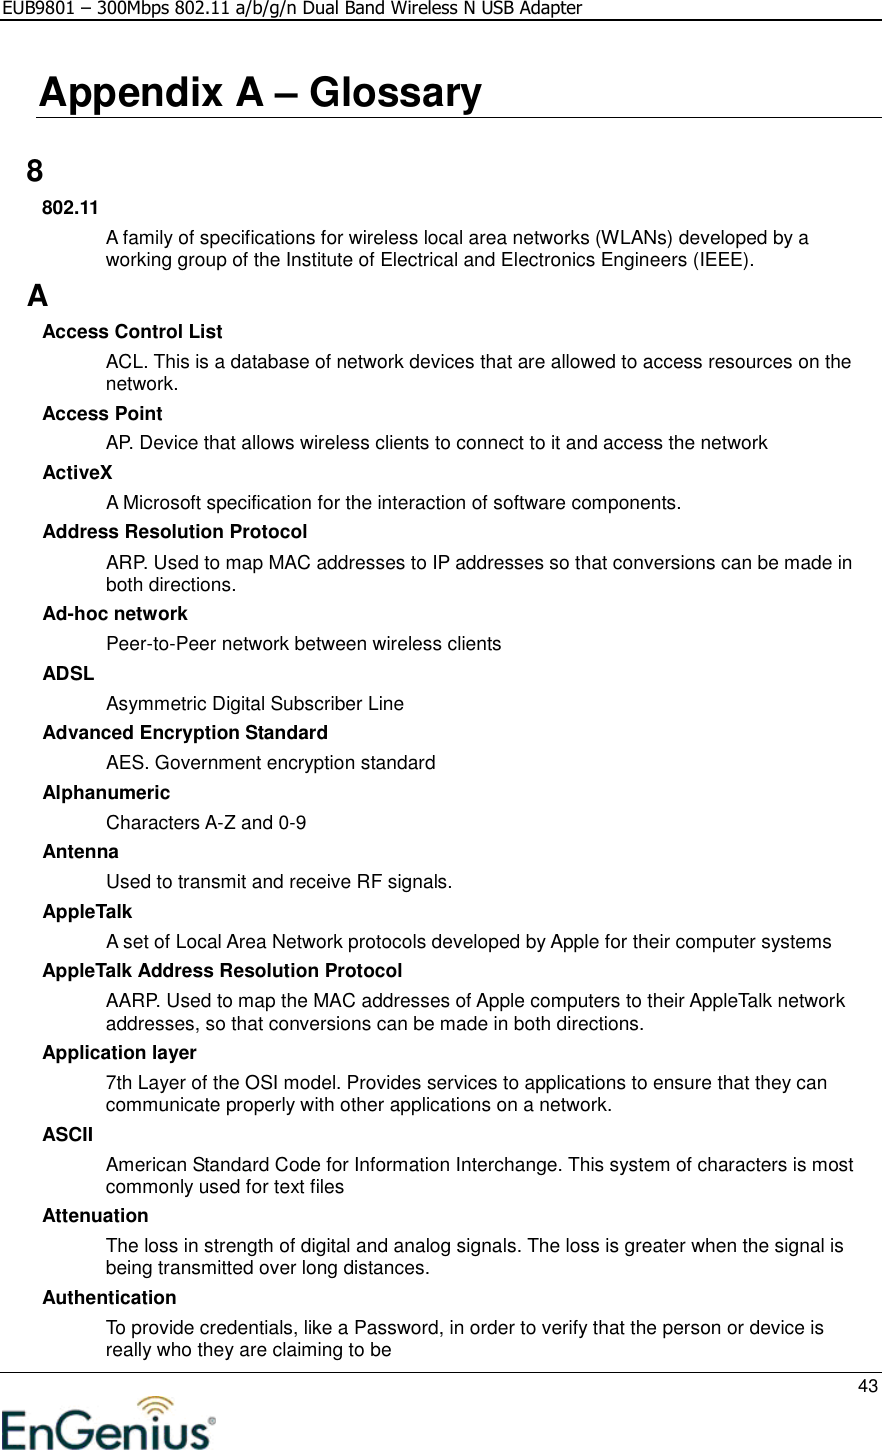 EUB9801 – 300Mbps 802.11 a/b/g/n Dual Band Wireless N USB Adapter     43  Appendix A – Glossary   8 802.11 A family of specifications for wireless local area networks (WLANs) developed by a working group of the Institute of Electrical and Electronics Engineers (IEEE).  A Access Control List ACL. This is a database of network devices that are allowed to access resources on the network. Access Point AP. Device that allows wireless clients to connect to it and access the network ActiveX A Microsoft specification for the interaction of software components.  Address Resolution Protocol ARP. Used to map MAC addresses to IP addresses so that conversions can be made in both directions. Ad-hoc network Peer-to-Peer network between wireless clients ADSL Asymmetric Digital Subscriber Line Advanced Encryption Standard AES. Government encryption standard Alphanumeric Characters A-Z and 0-9 Antenna Used to transmit and receive RF signals. AppleTalk A set of Local Area Network protocols developed by Apple for their computer systems AppleTalk Address Resolution Protocol AARP. Used to map the MAC addresses of Apple computers to their AppleTalk network addresses, so that conversions can be made in both directions. Application layer 7th Layer of the OSI model. Provides services to applications to ensure that they can communicate properly with other applications on a network. ASCII American Standard Code for Information Interchange. This system of characters is most commonly used for text files Attenuation The loss in strength of digital and analog signals. The loss is greater when the signal is being transmitted over long distances. Authentication To provide credentials, like a Password, in order to verify that the person or device is really who they are claiming to be 